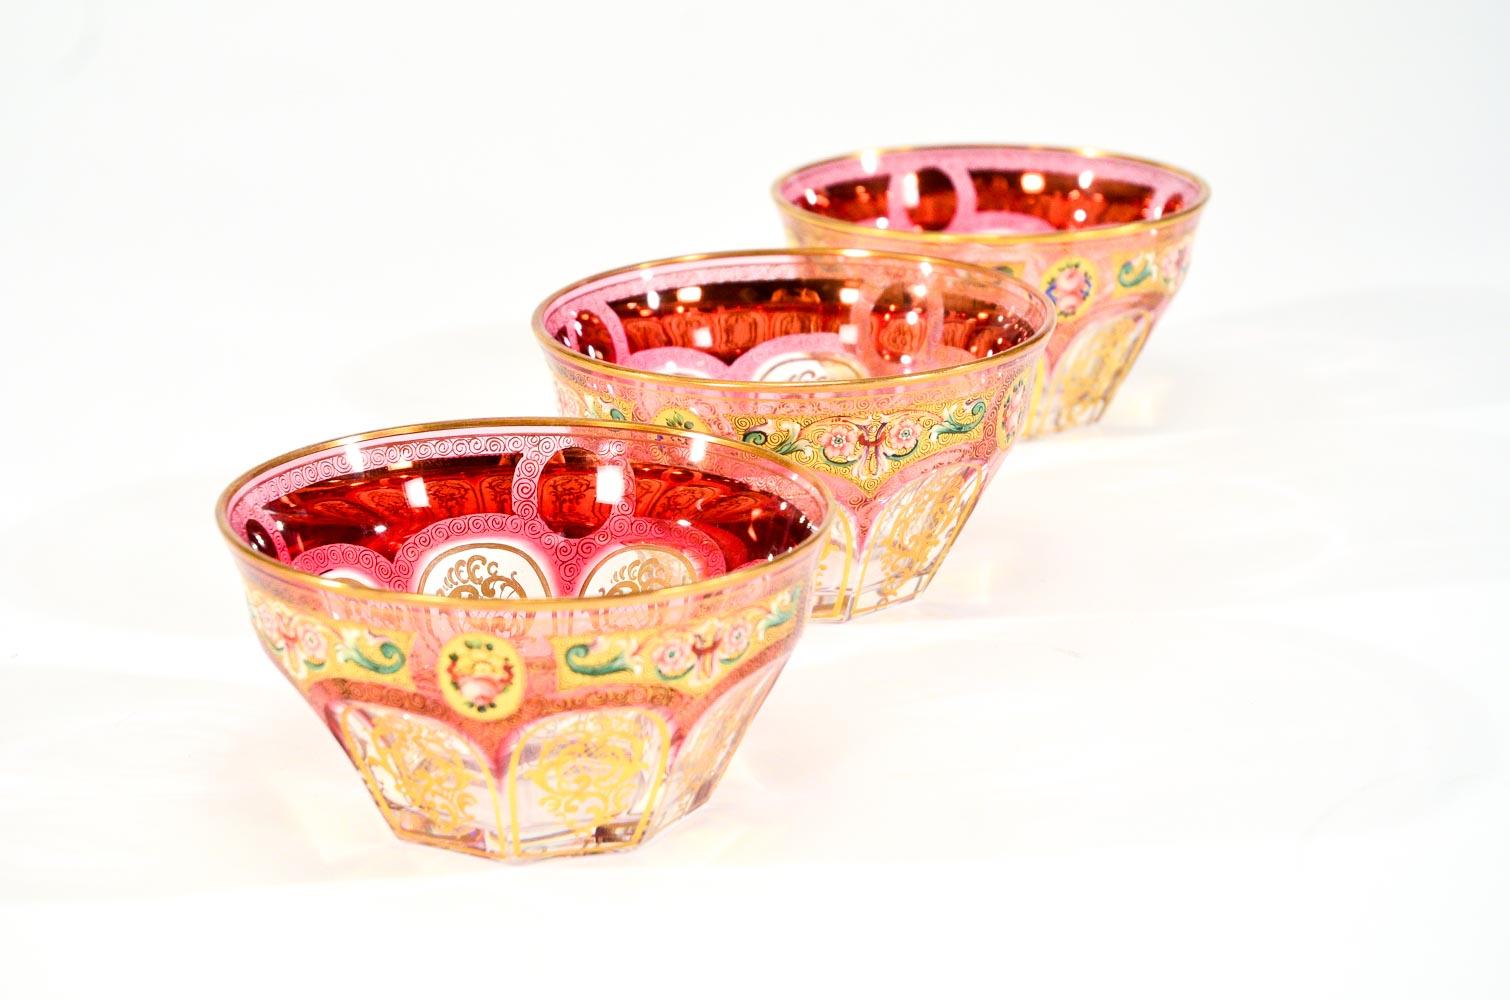 20th Century Set of 12 Baccarat/Moser Crystal Bowls with Hand-Painted Enamel Gilt Decoration